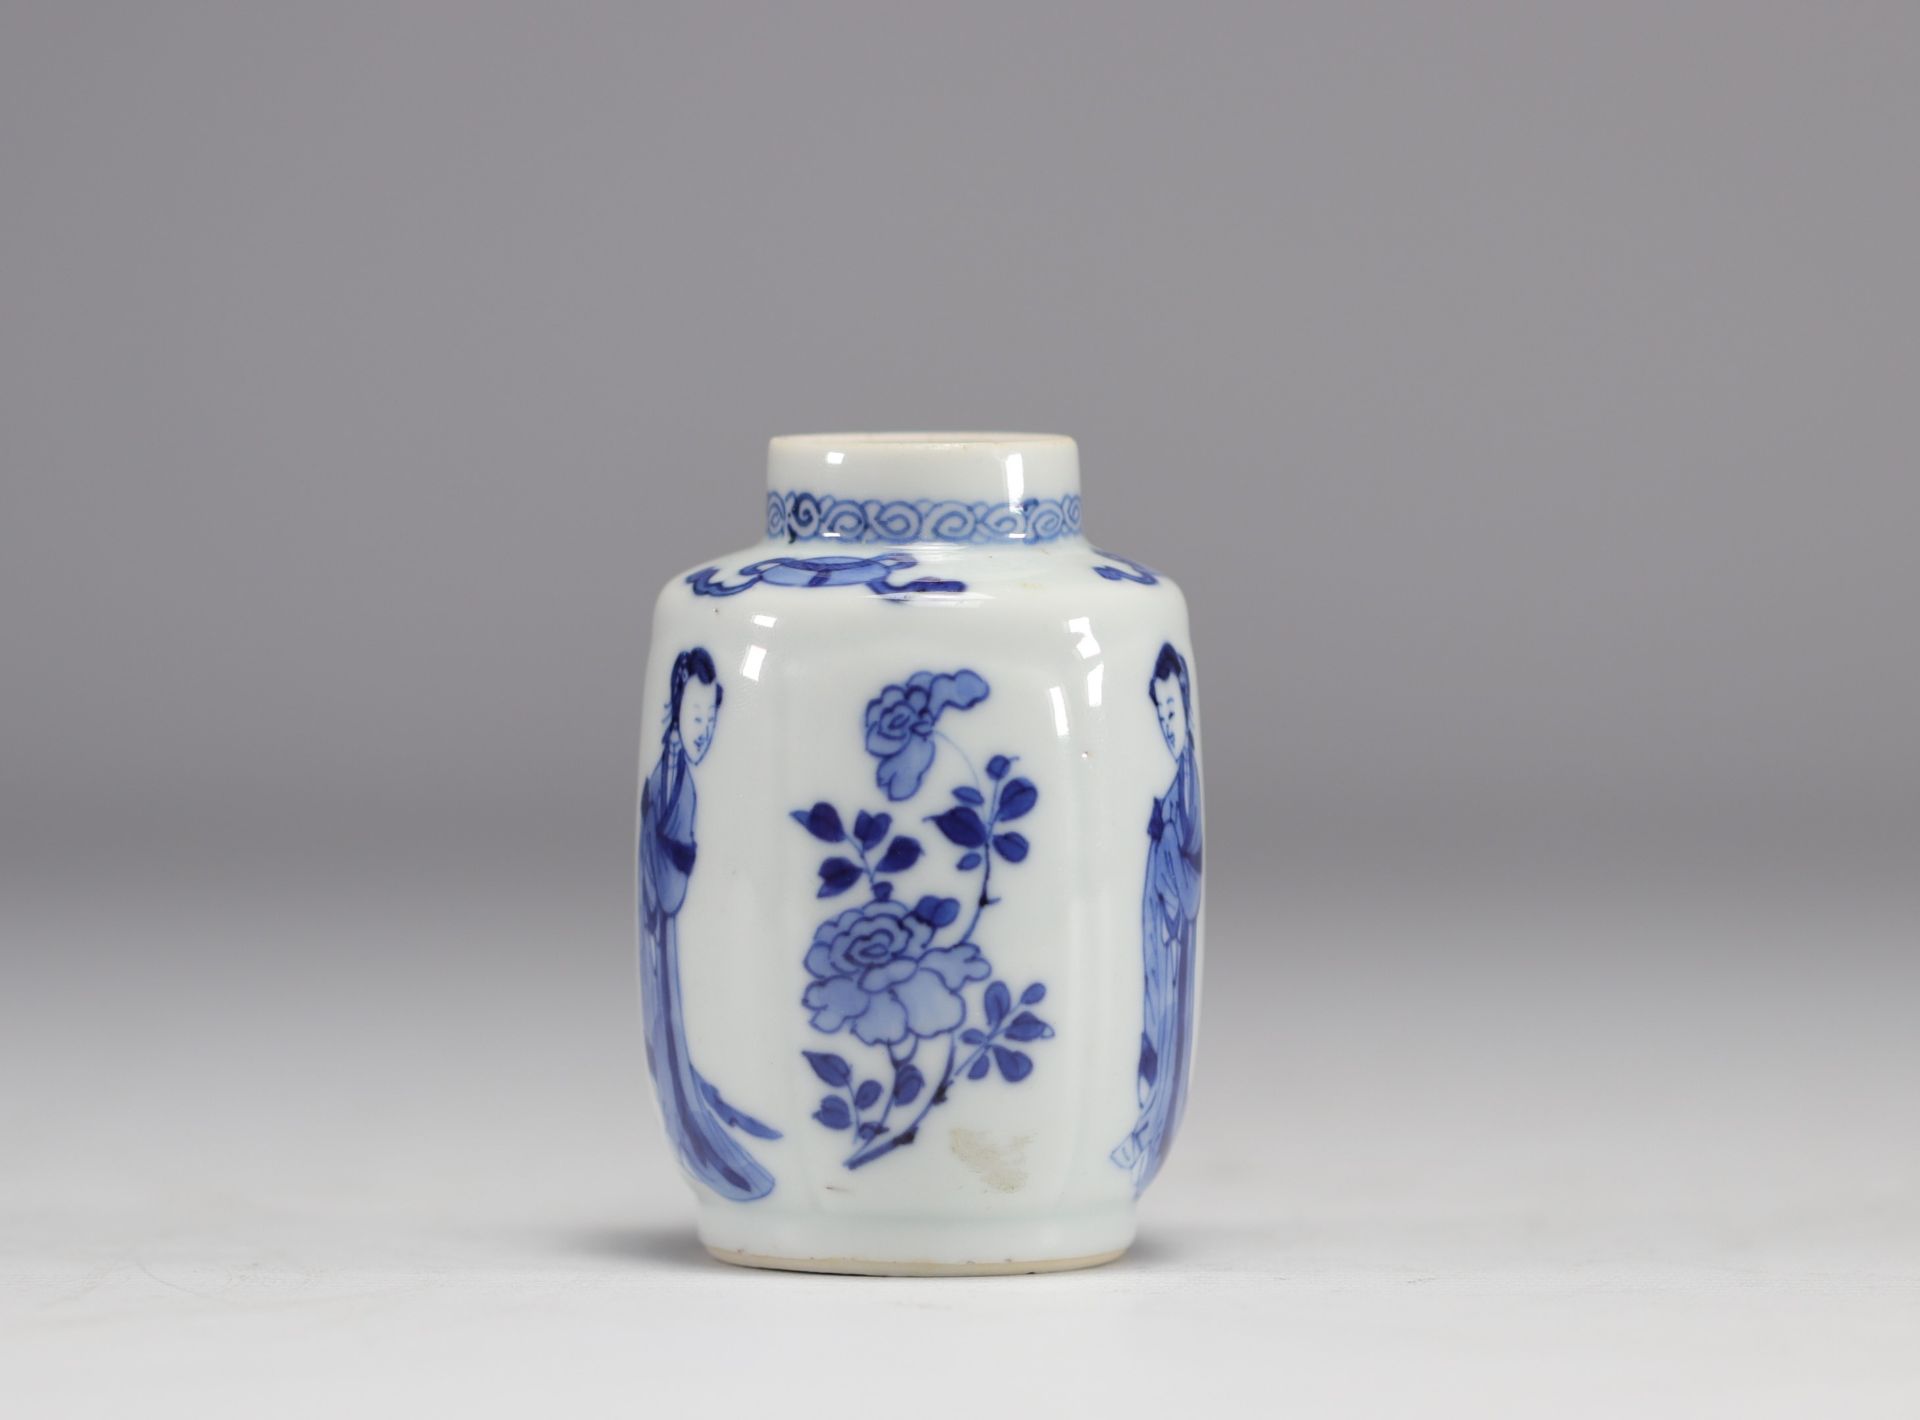 A small white and blue vase decorated with flowers and women in traditional dress from the Kangxi pe - Image 2 of 6